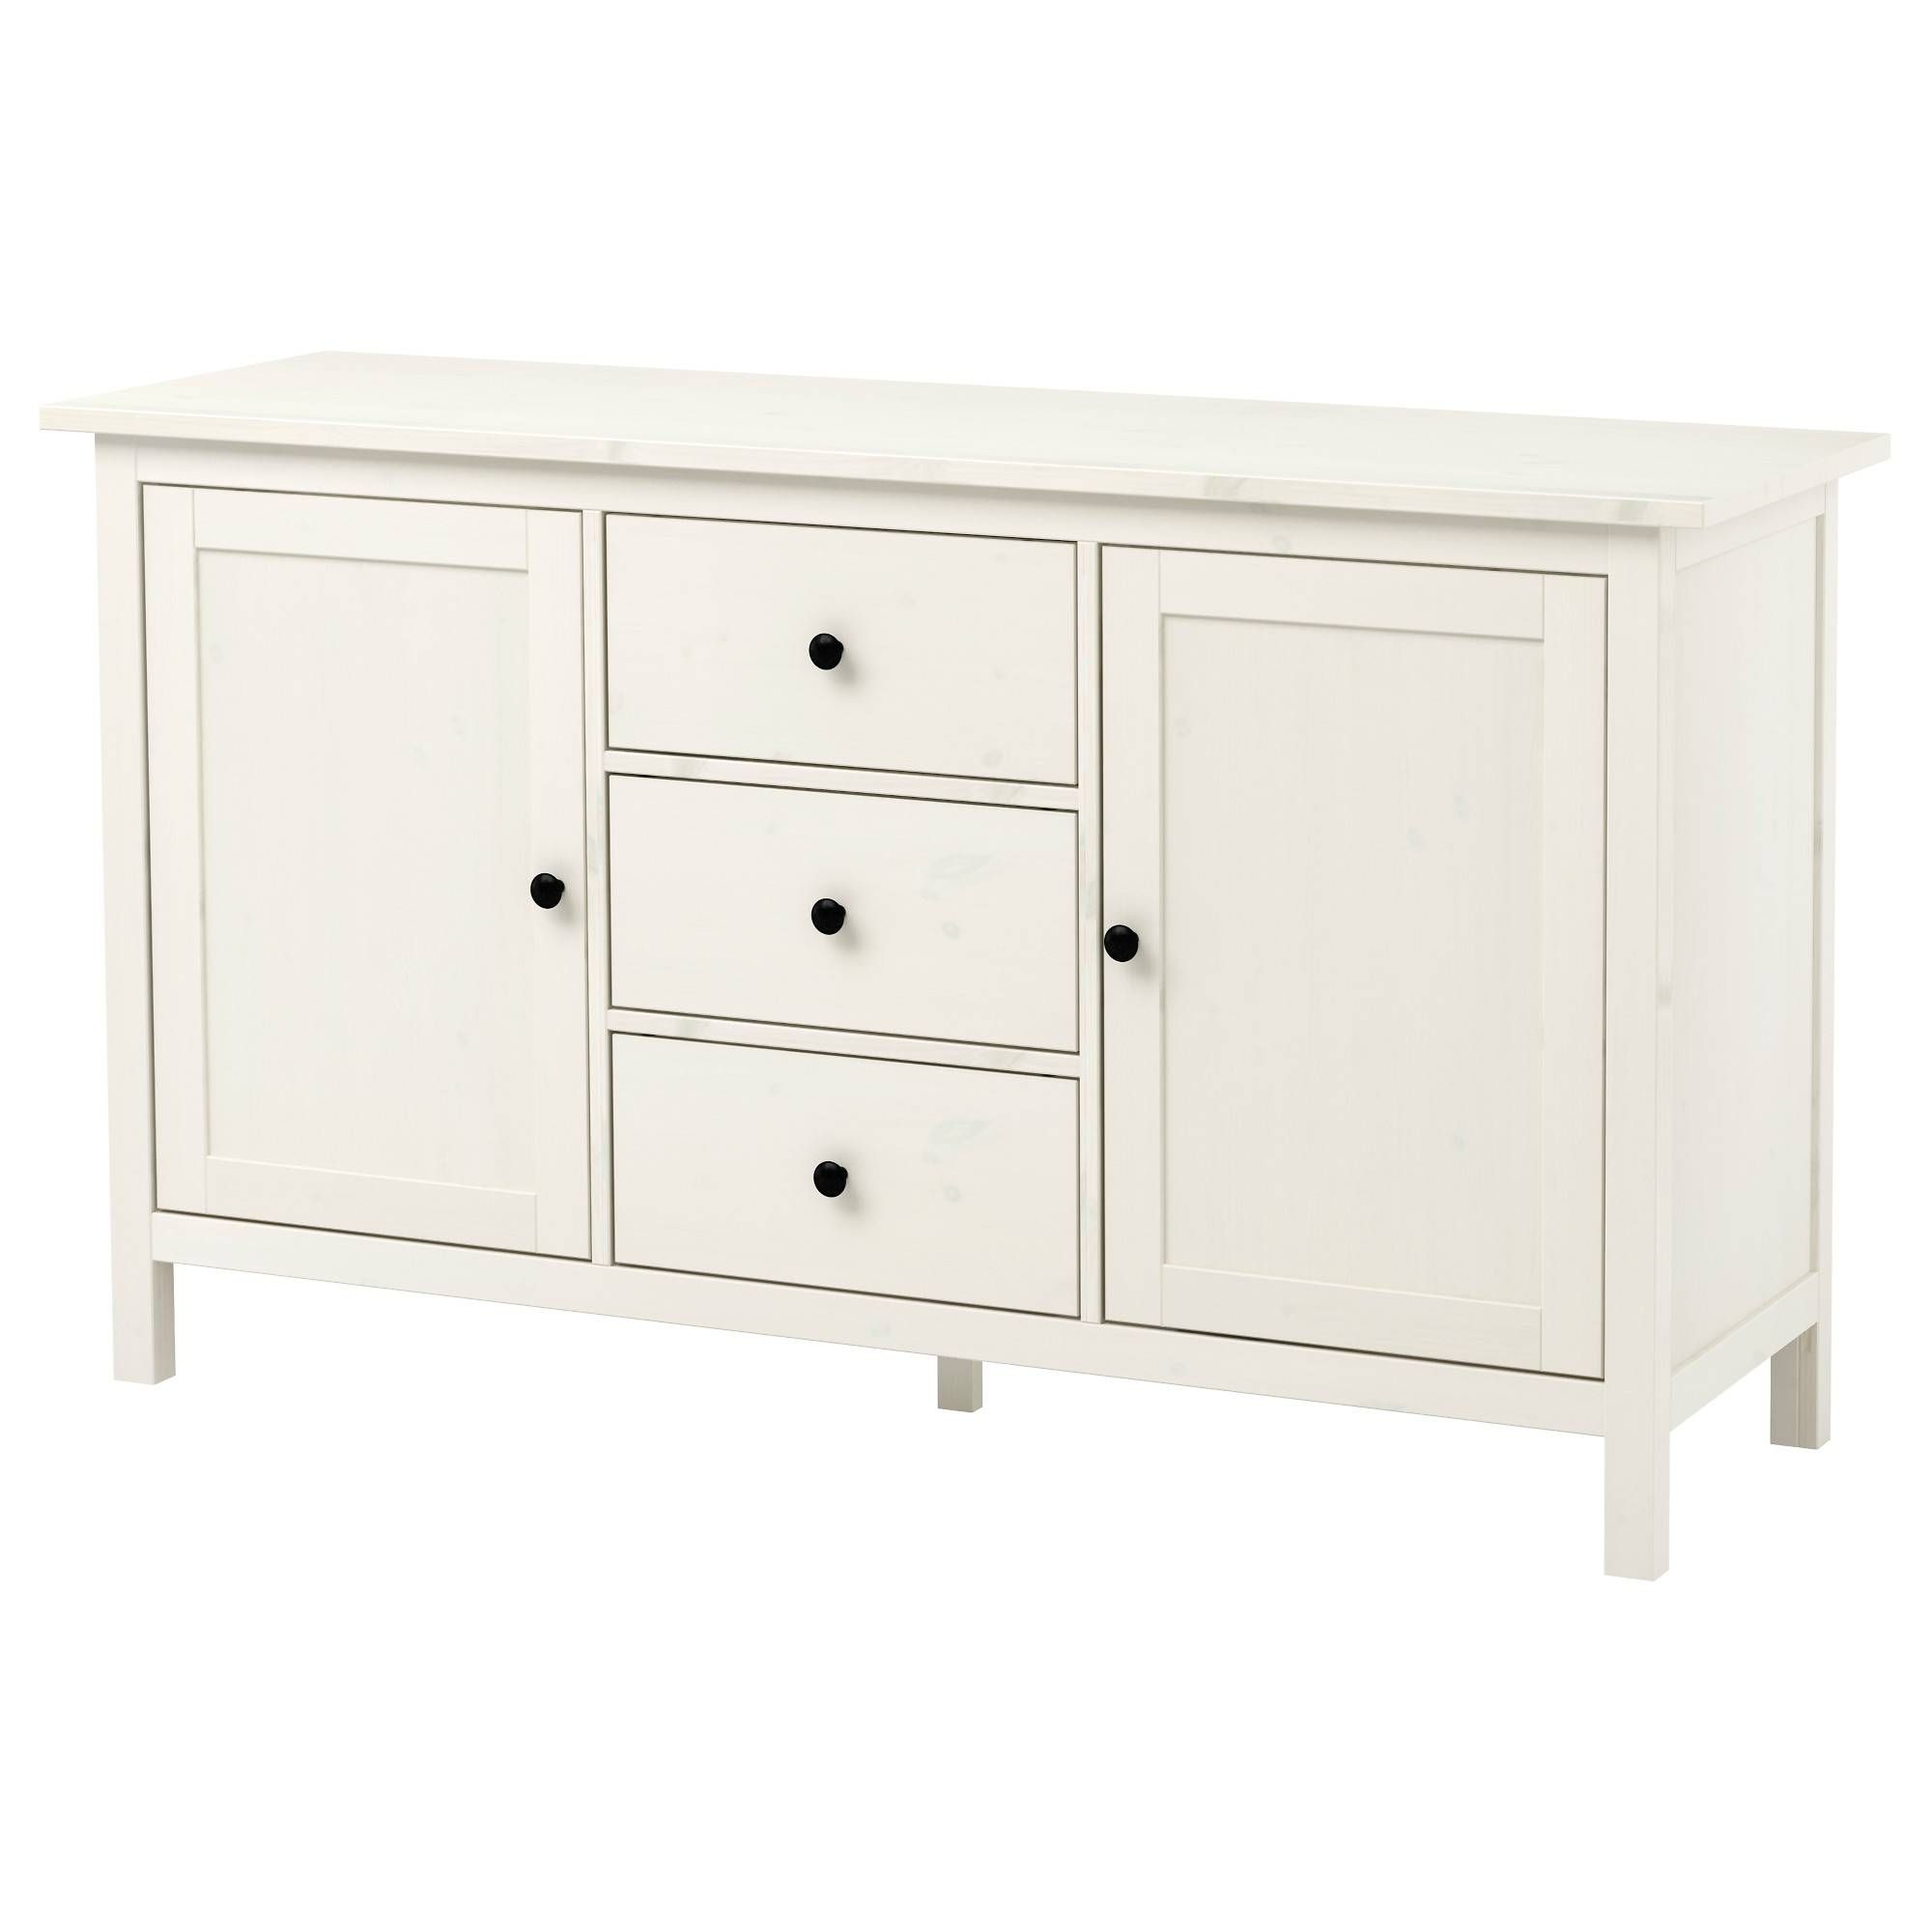 Hemnes Sideboard White Stain 157x88 Cm – Ikea For Thin Sideboard (View 6 of 20)